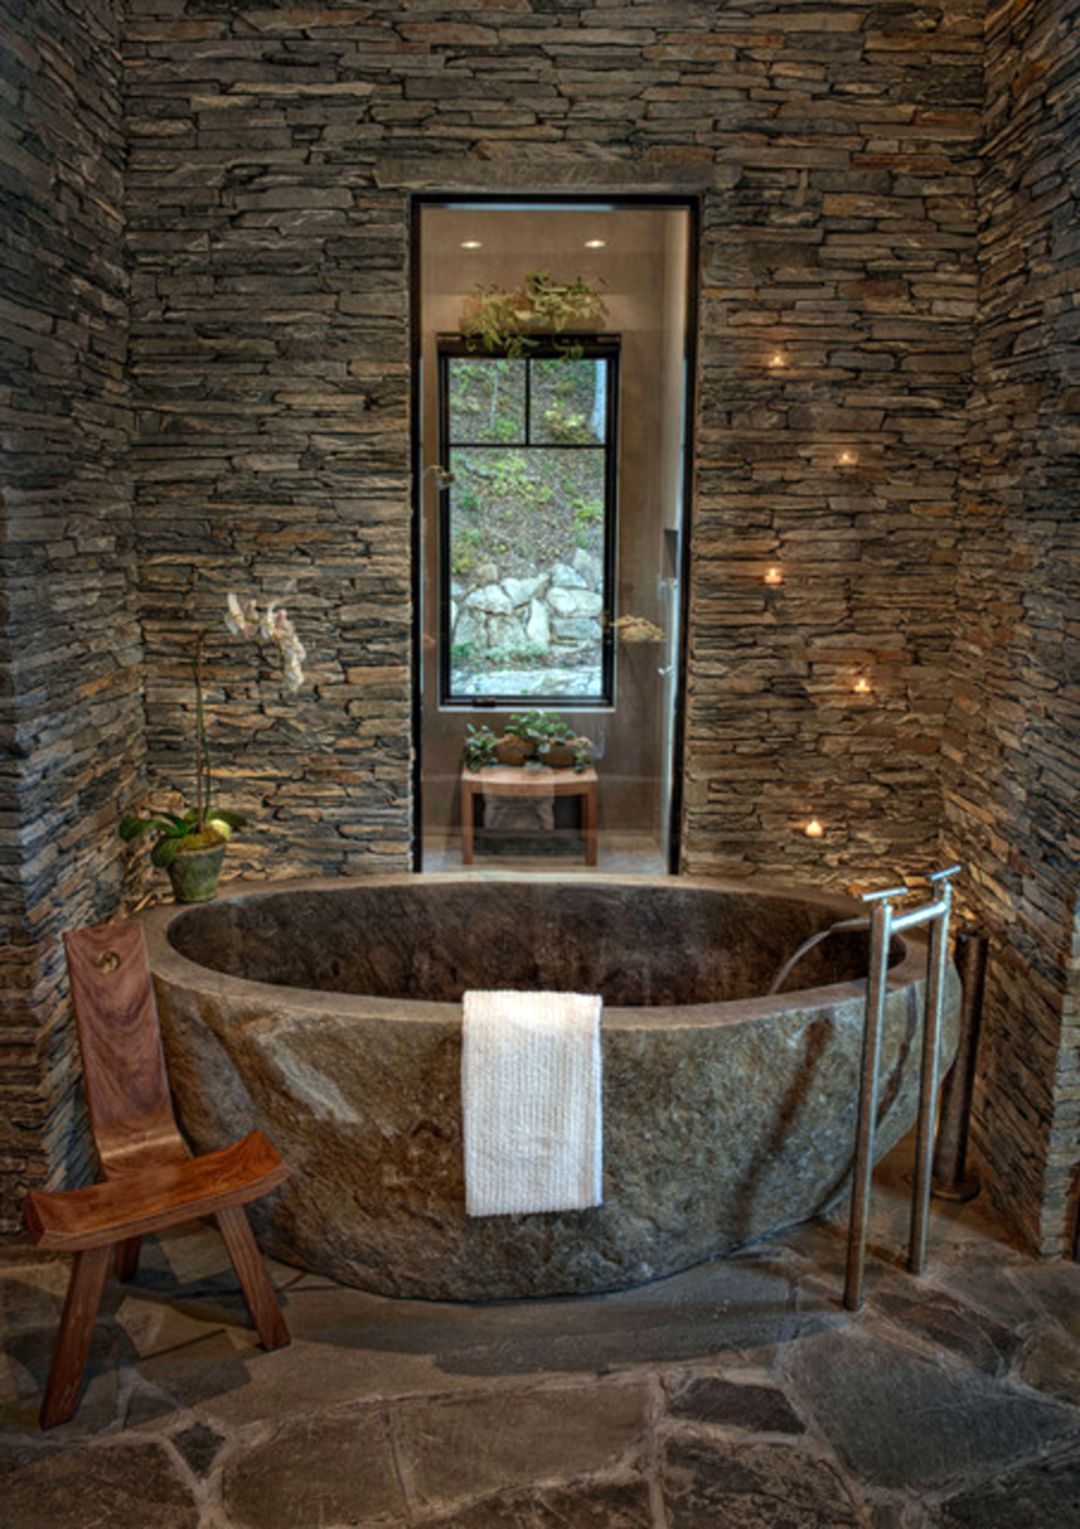 Rustic Bathtub From Stone Material